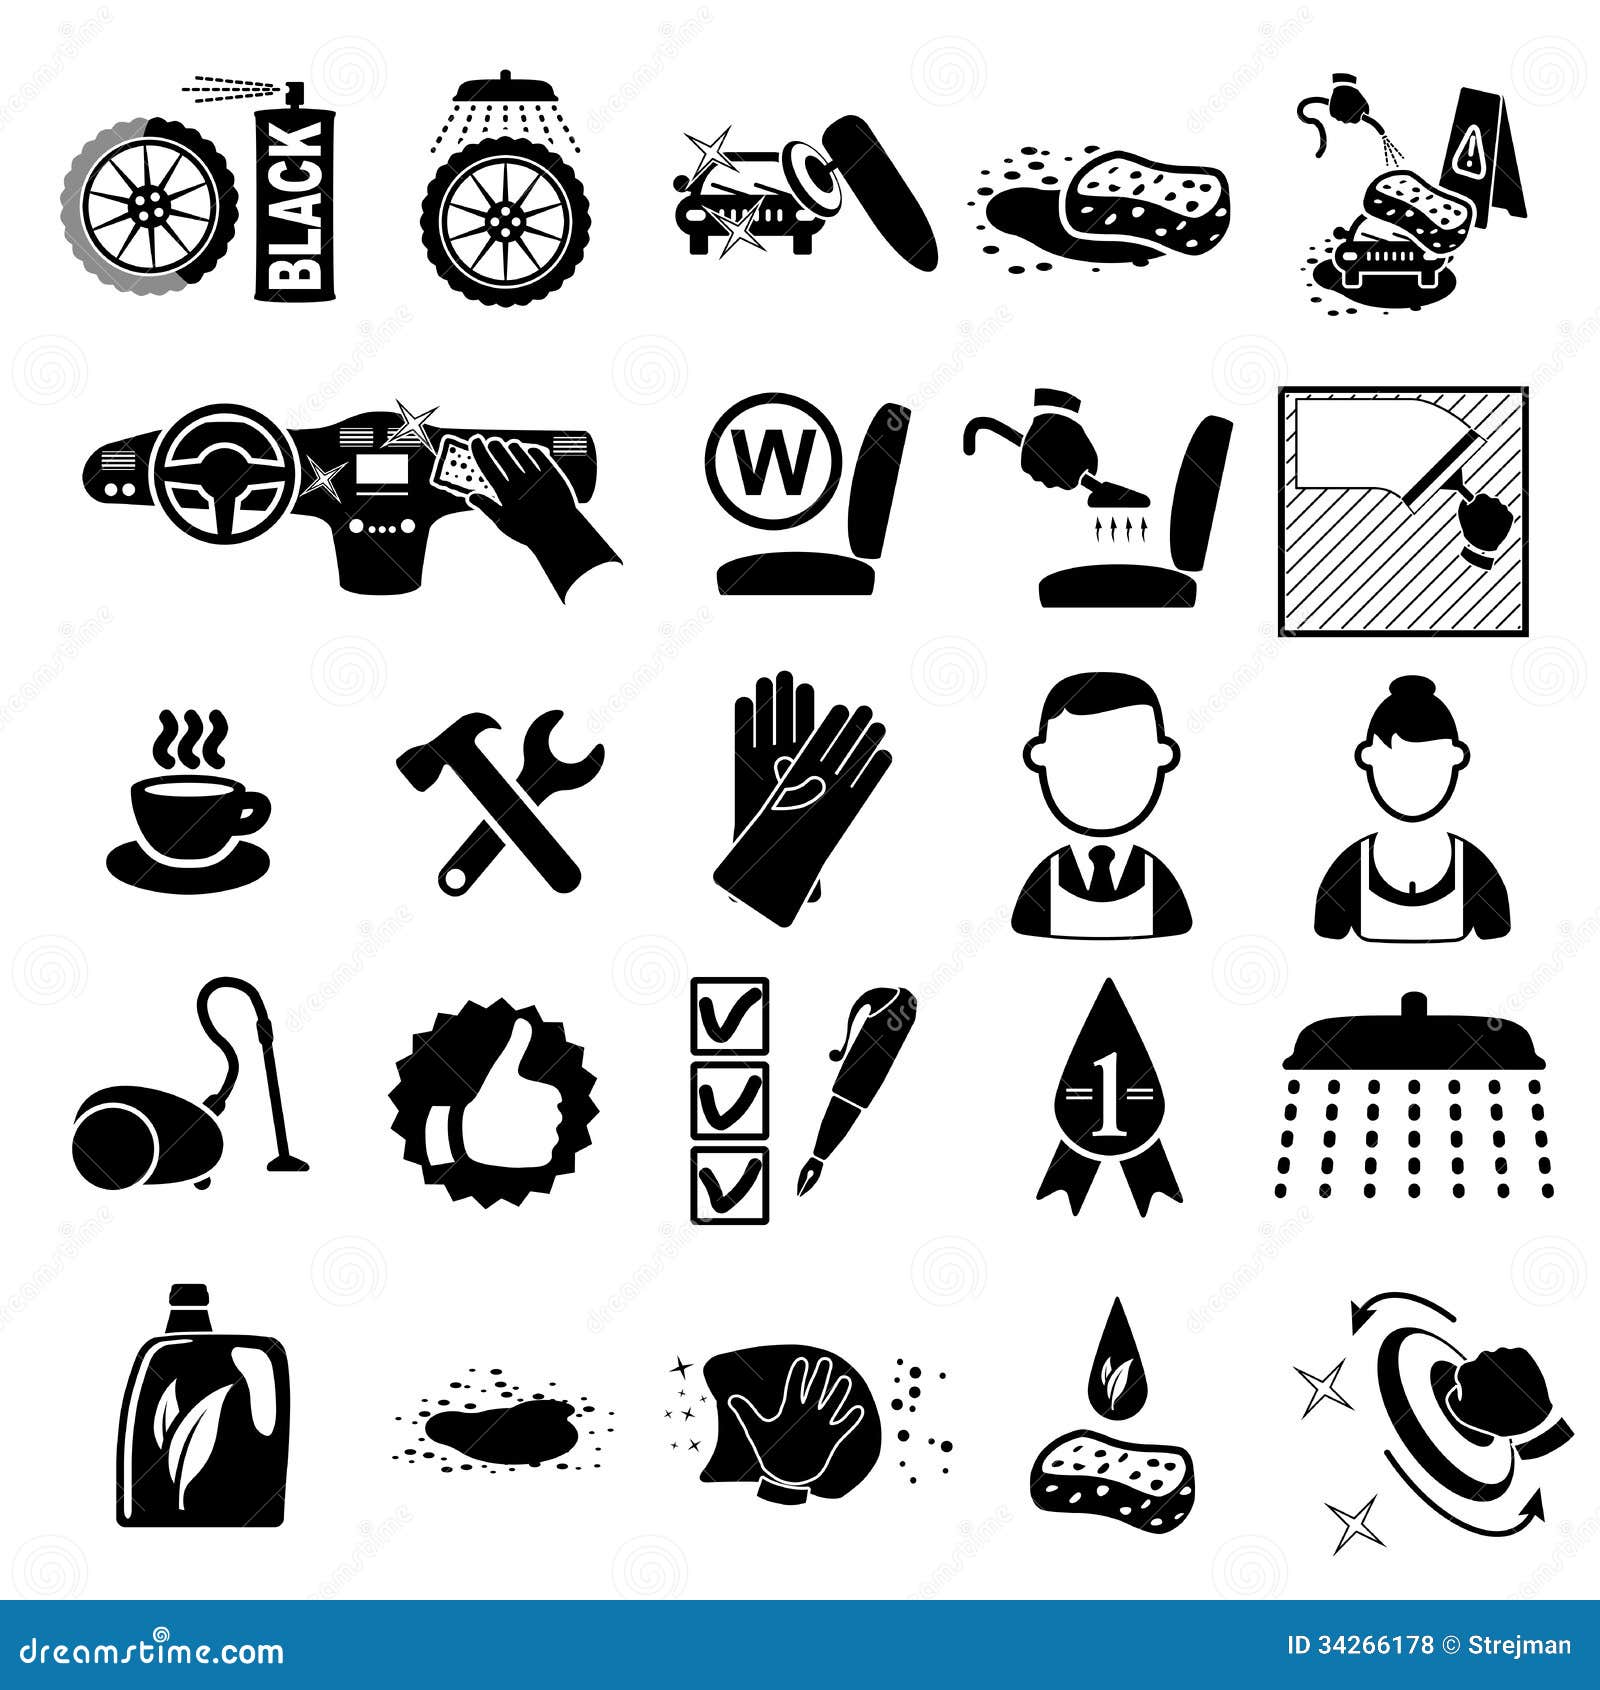 free car wash clipart black and white - photo #24